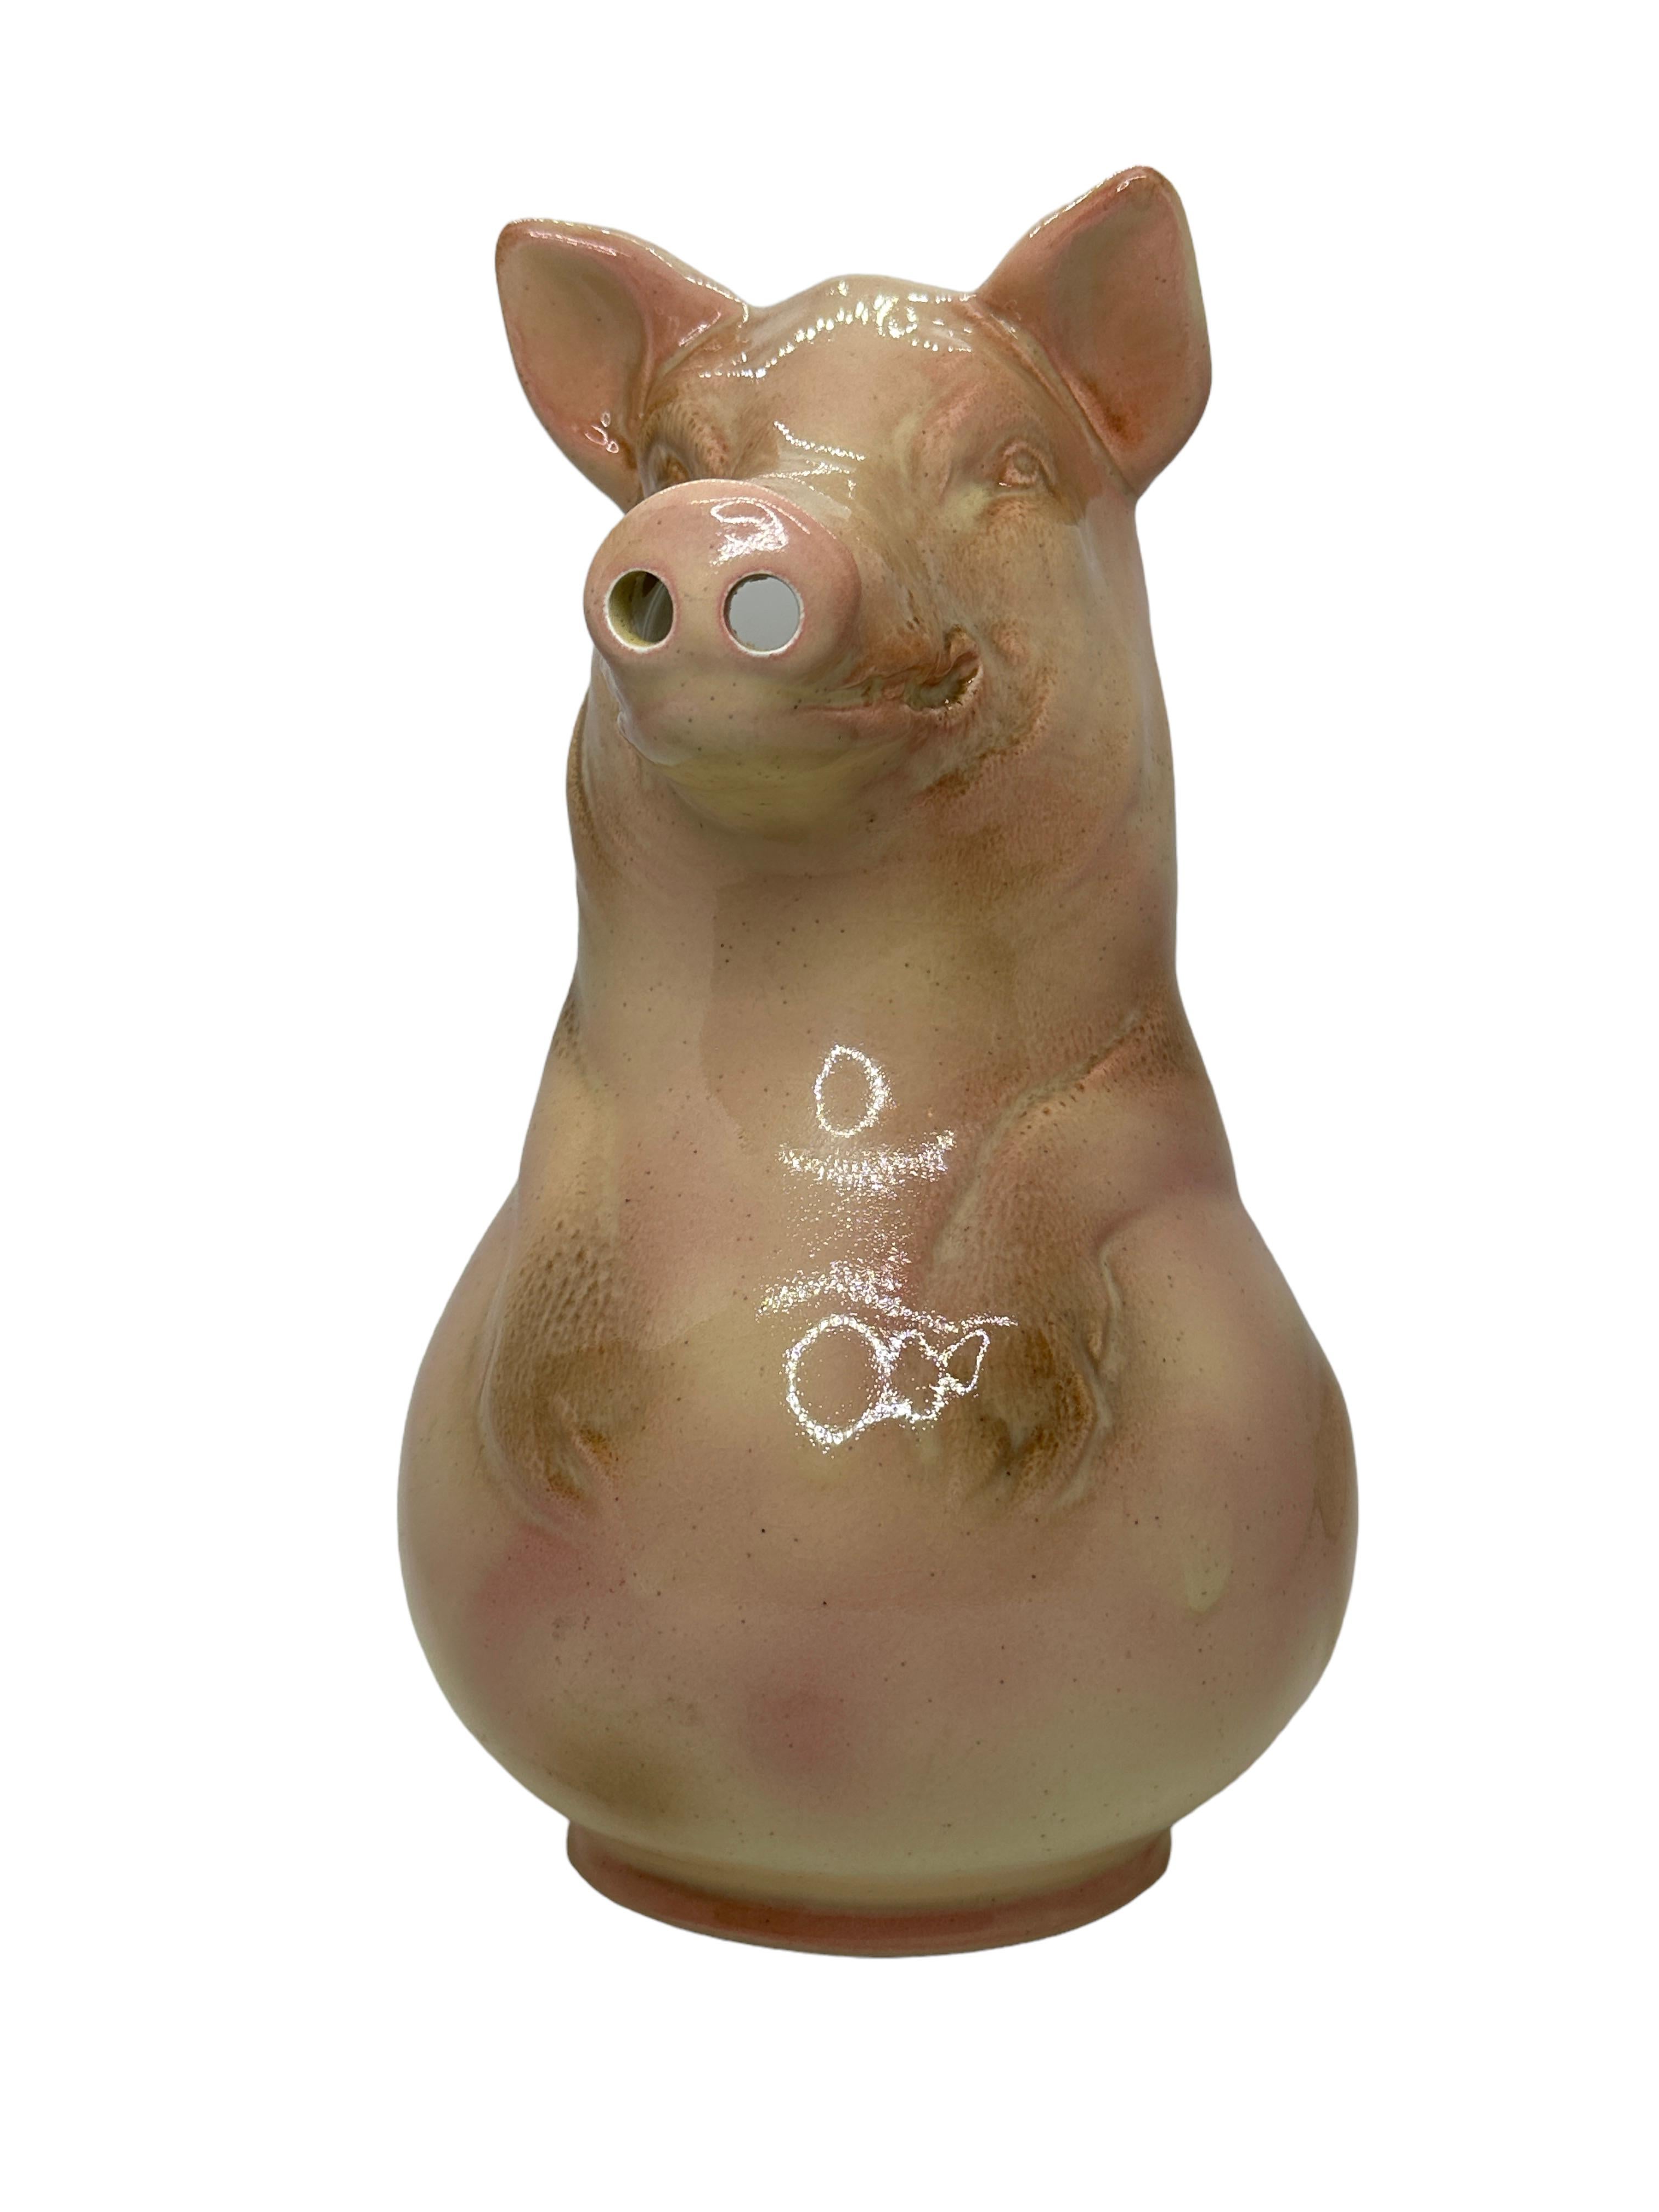 Decorate a shelf or a kitchen counter with this elegant antique barbotine pitcher. Created by Sarreguemines, France in the 1930s, the pitcher depicts a smiling pig figure hand painted in a cream palette with pink nose and ears. The water jug is in